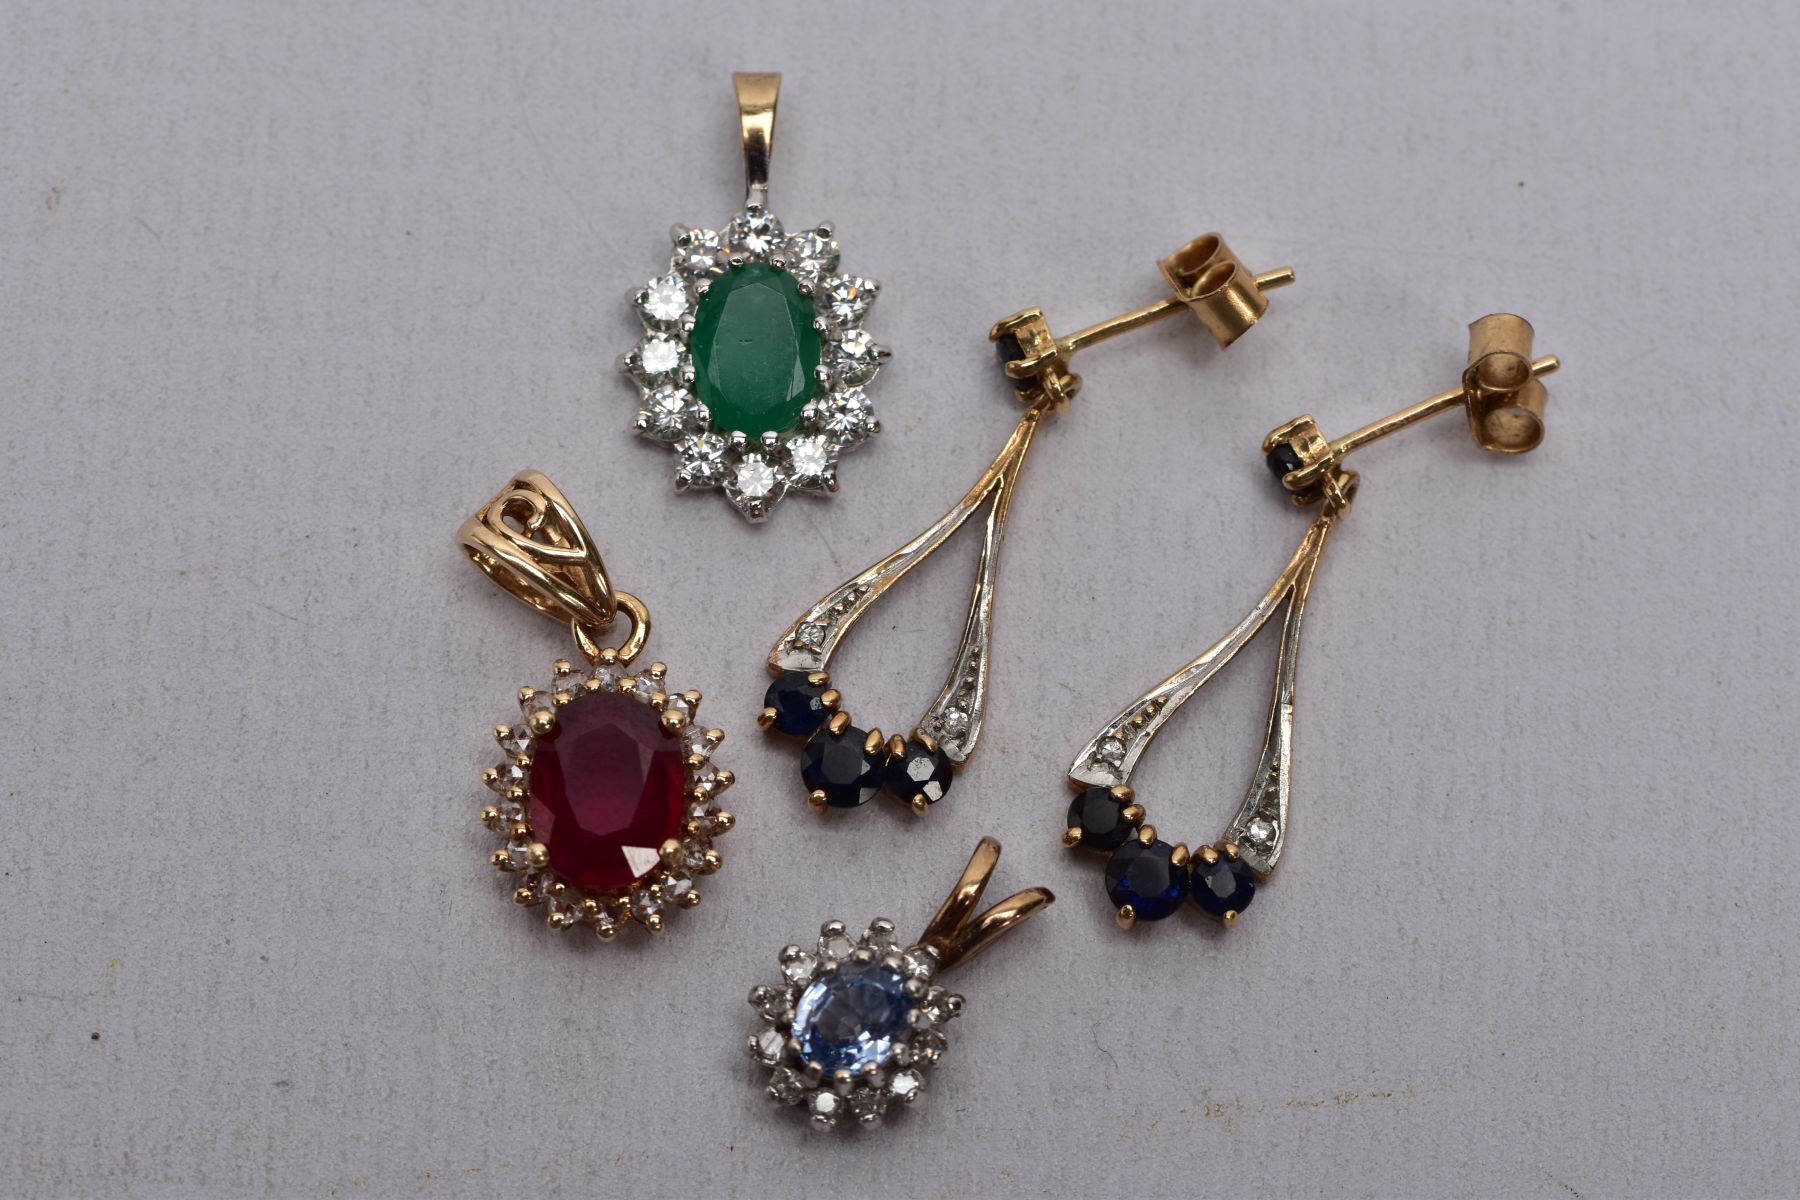 A PAIR OF 9CT GOLD SAPPHIRE AND DIAMOND DROP EARRINGS, TWO 9CT GOLD GEM SET PENDANTS AND A YELLOW